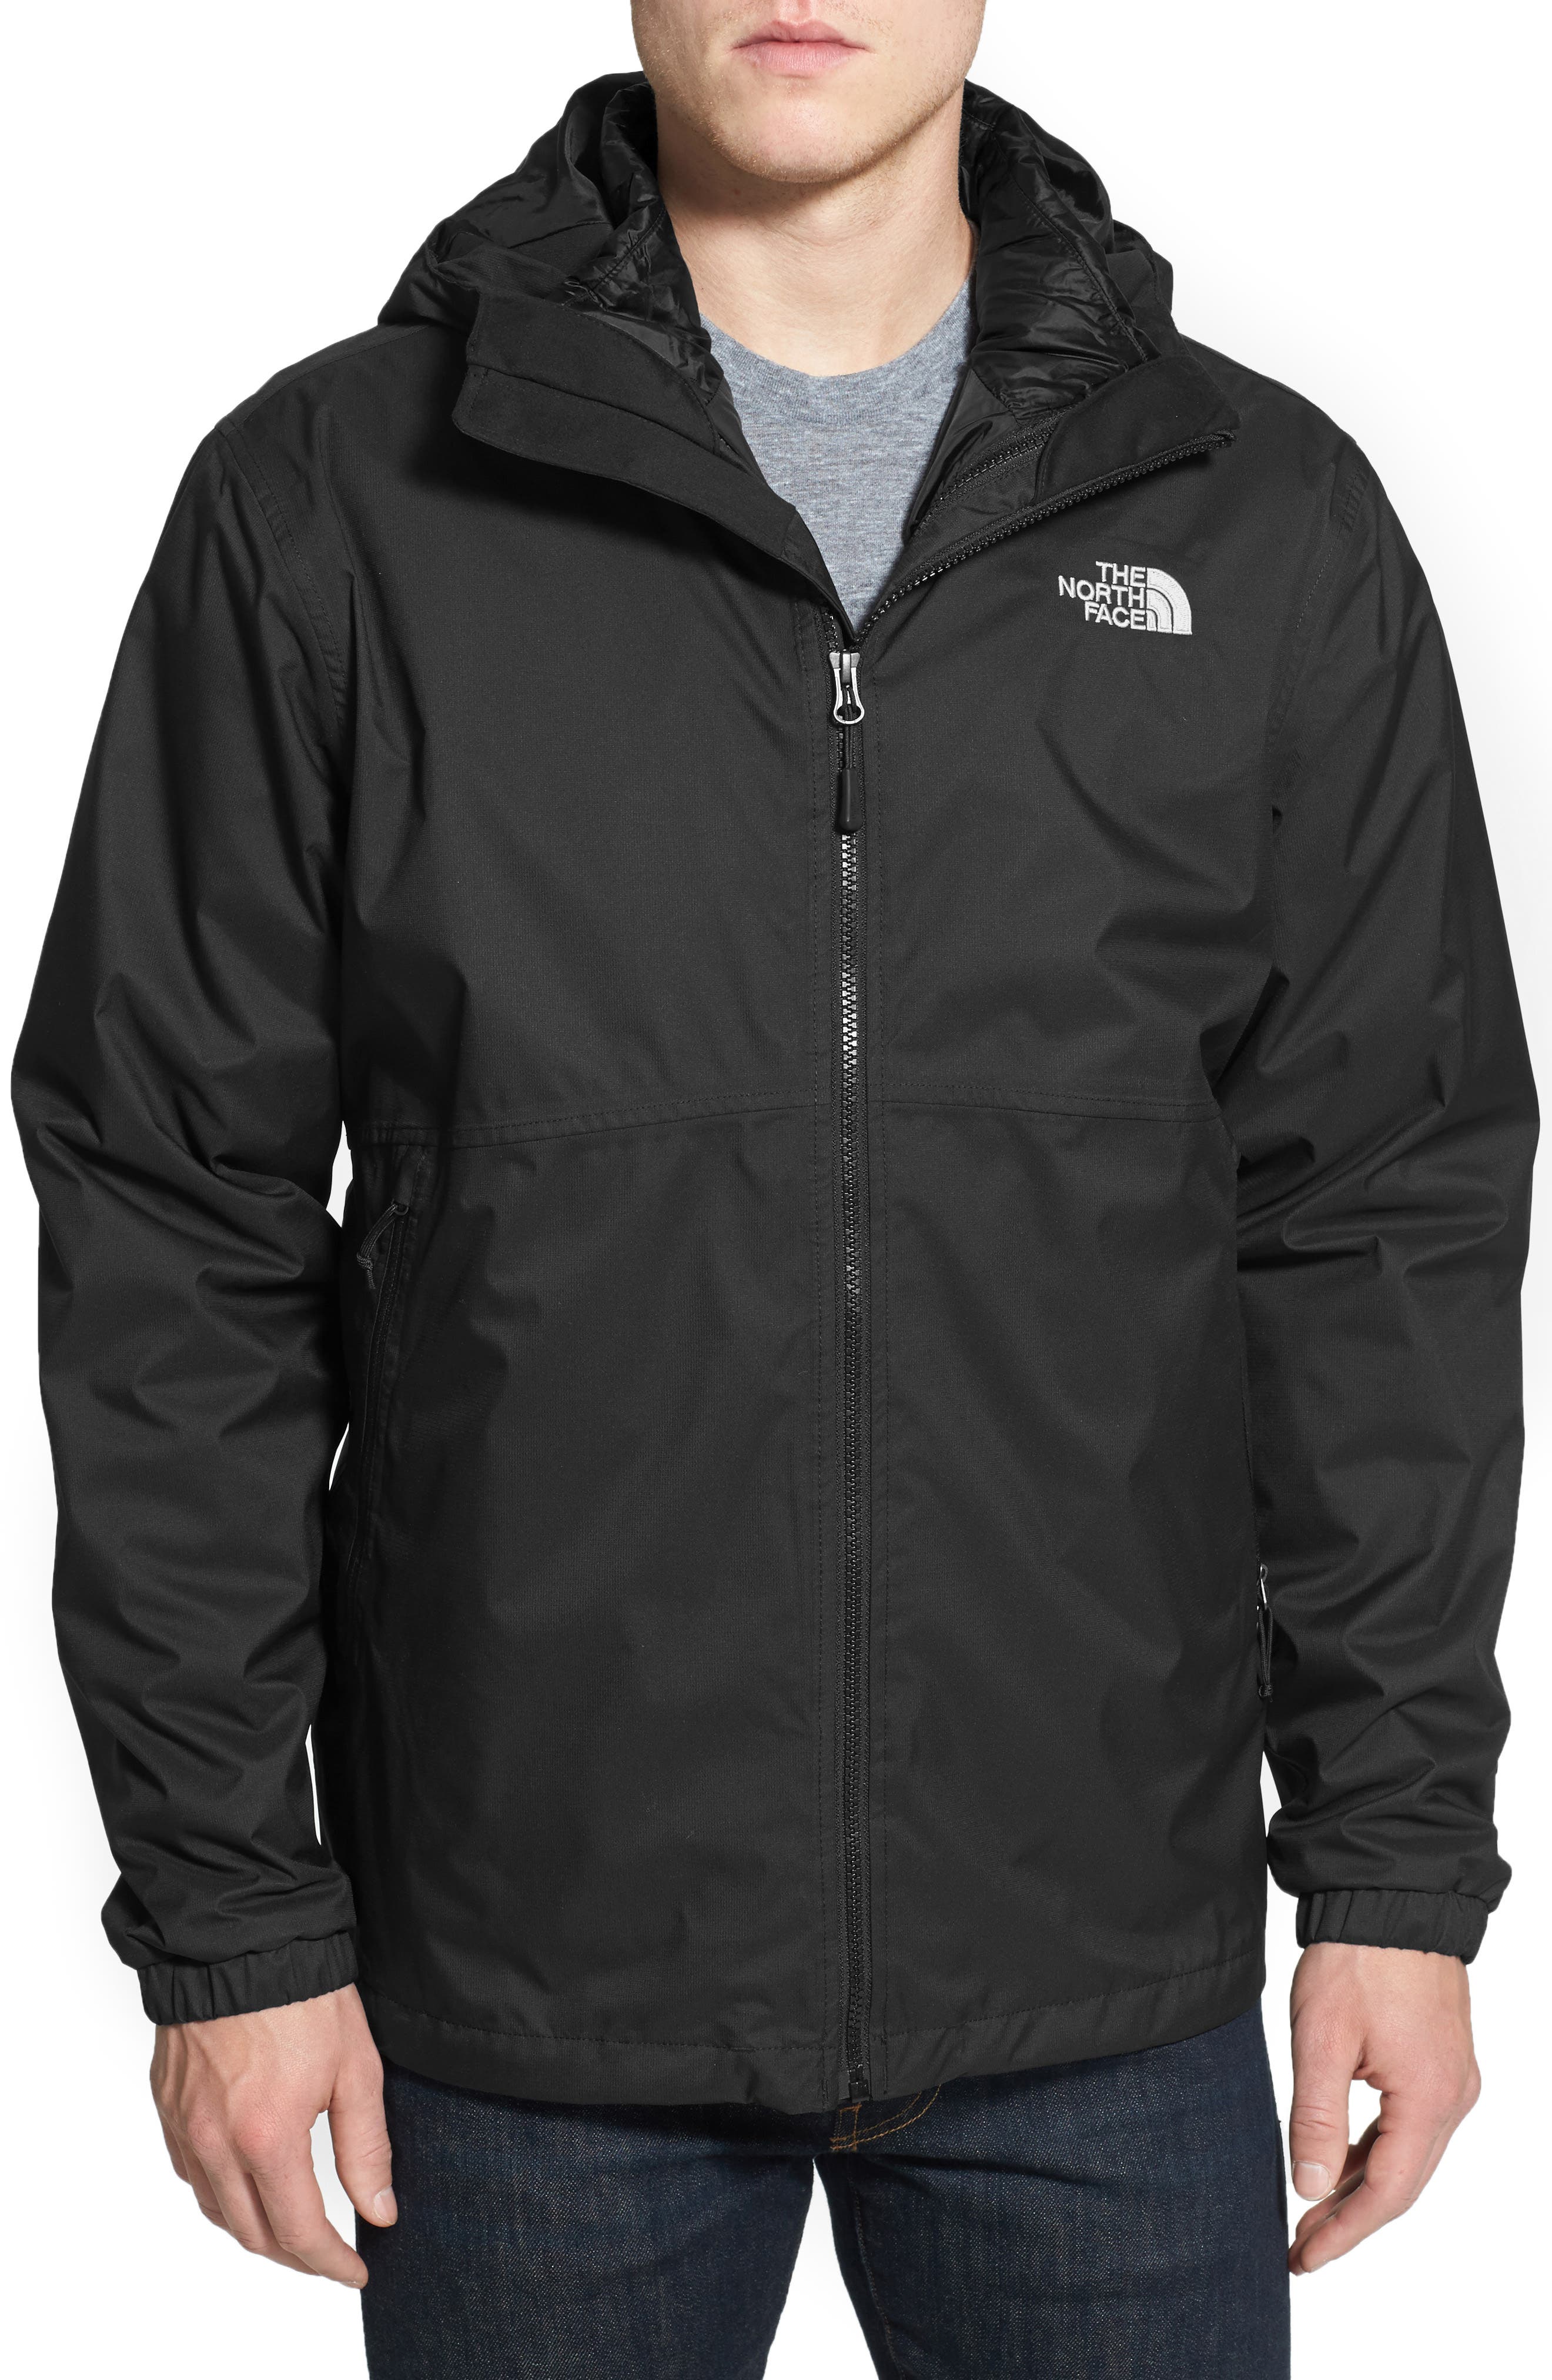 north face triclimate hyvent